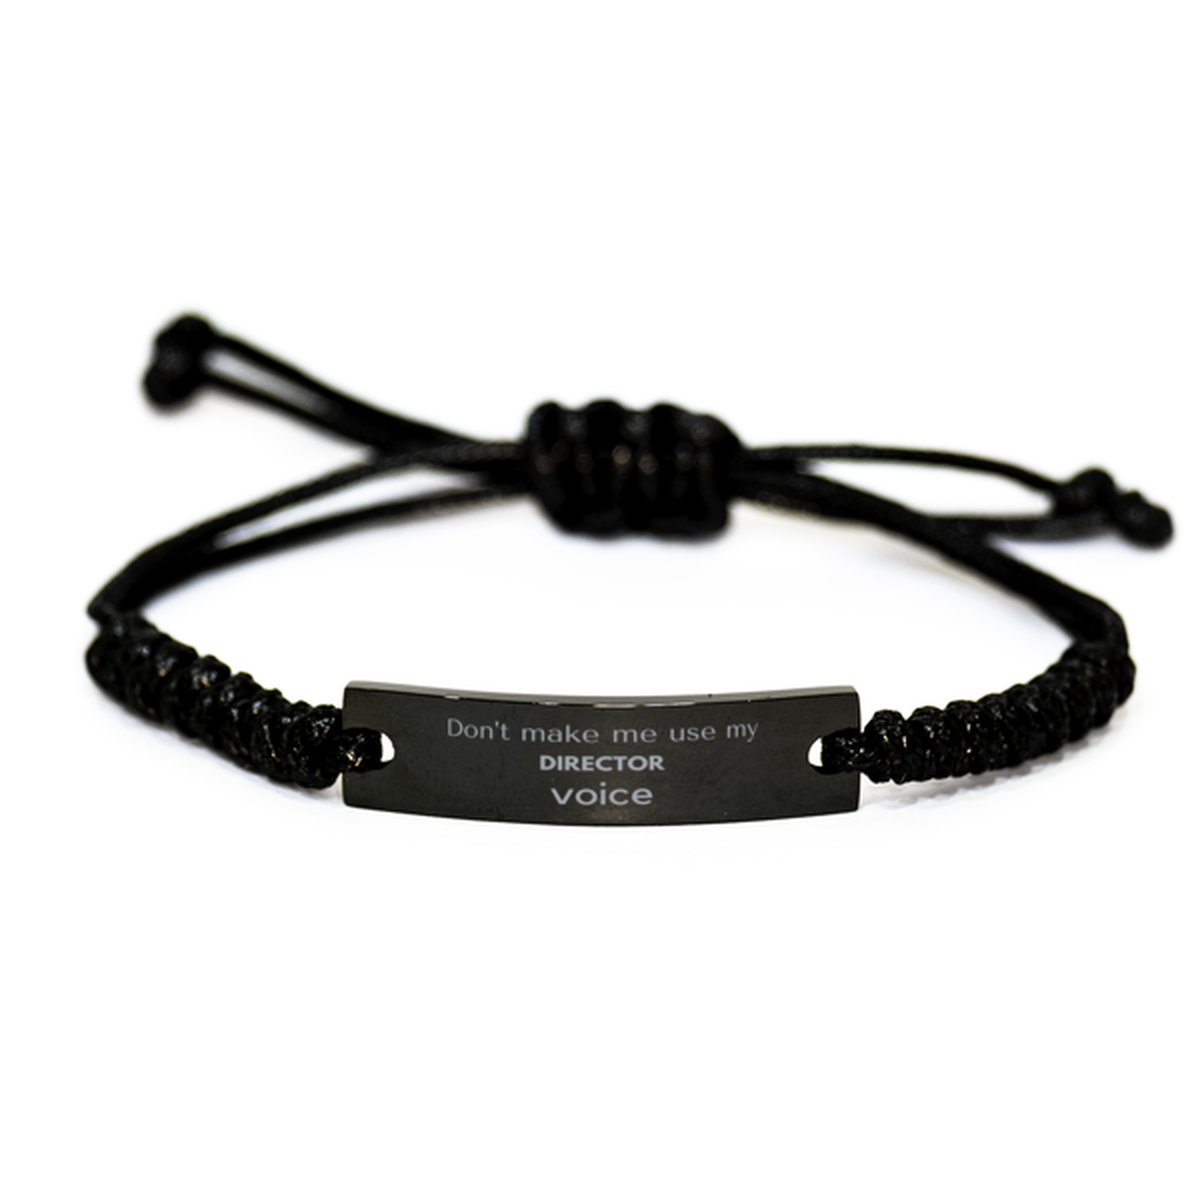 Don't make me use my Director voice, Sarcasm Director Gifts, Christmas Director Black Rope Bracelet Birthday Unique Gifts For Director Coworkers, Men, Women, Colleague, Friends